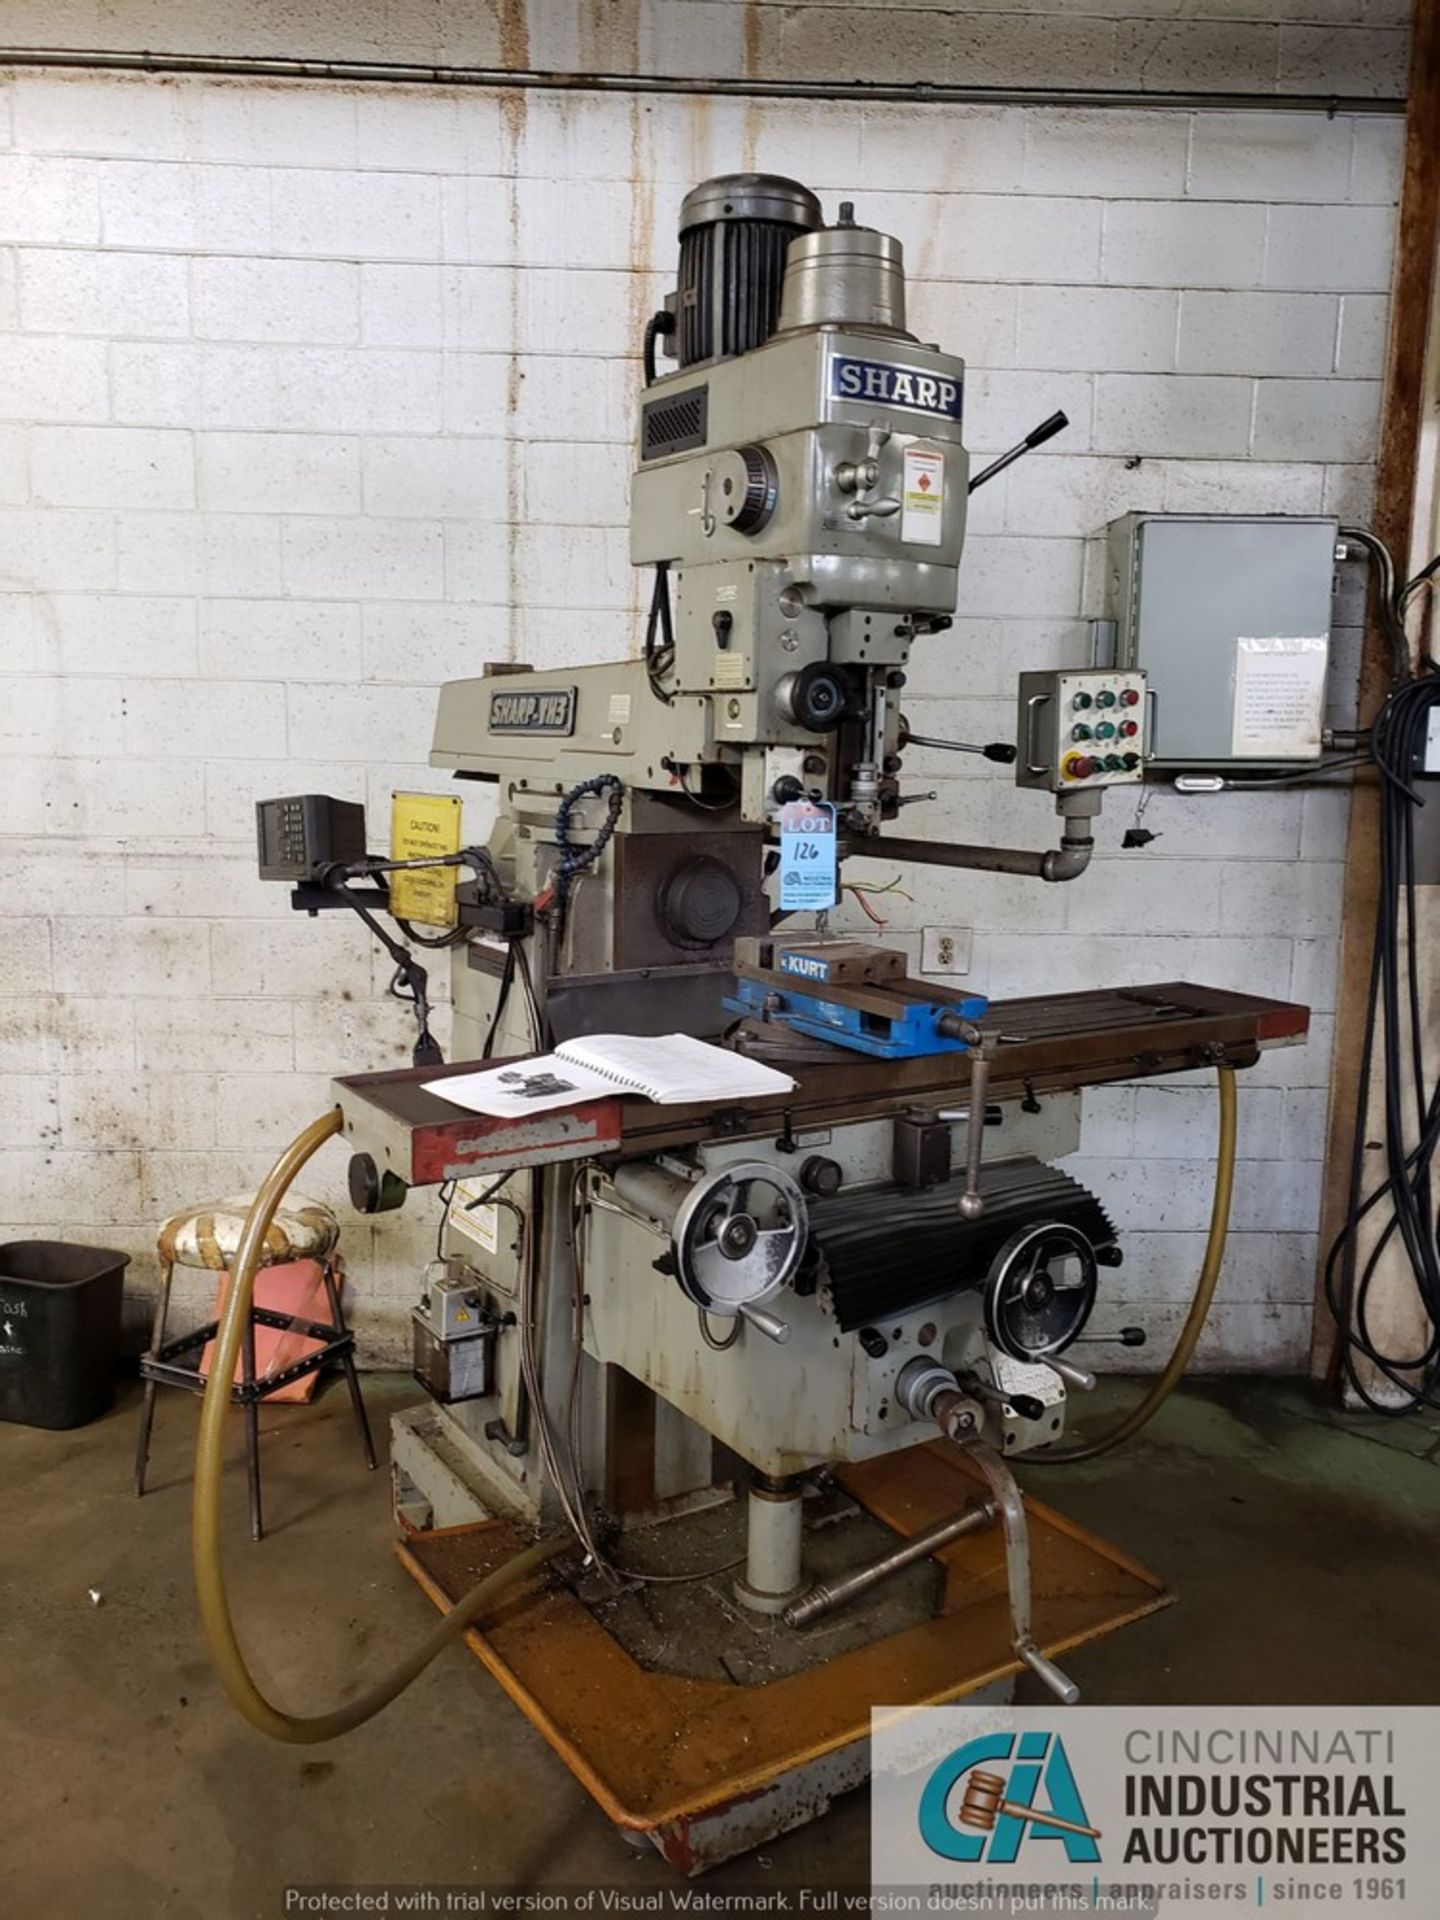 SHARPE MODEL VH3 VERTICAL MILLING MACHINE; S/N 2B399, 12" X 52" TABLE, SPINDLE SPEED 35-1,700 RPM,